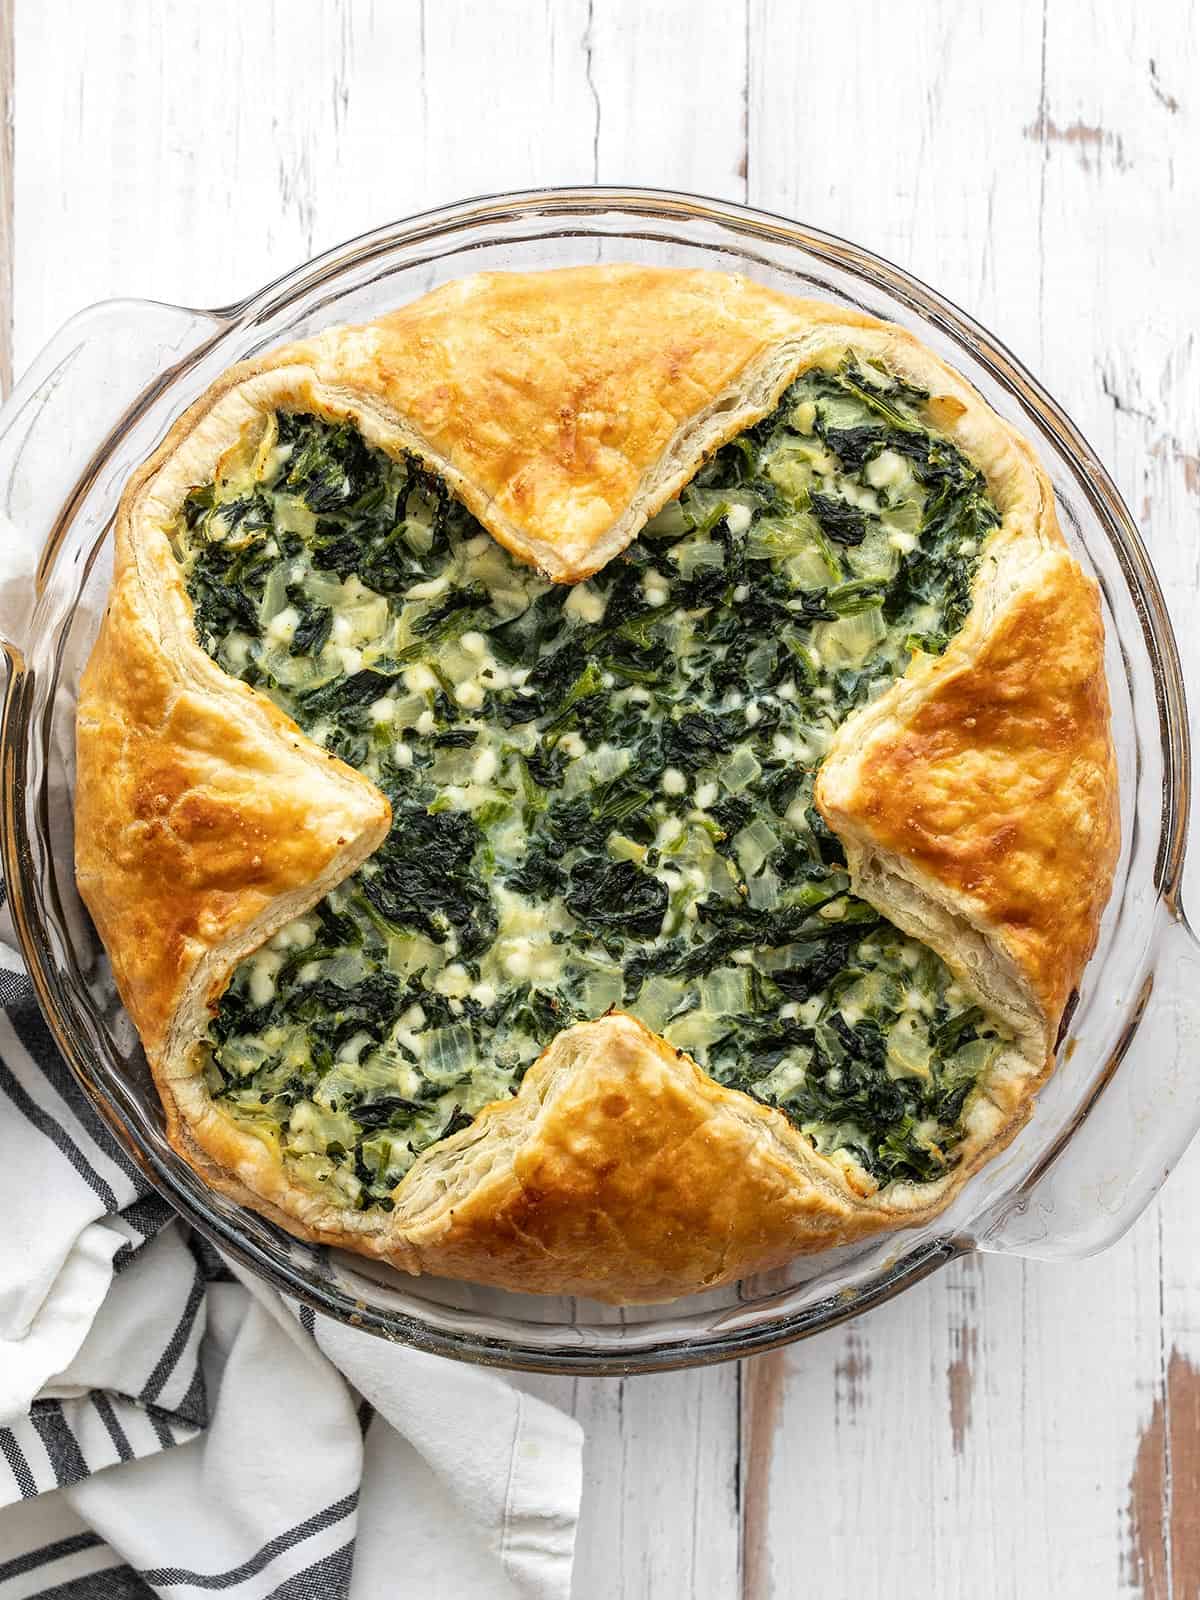 Overhead view of a spinach pie in a glass pie dish on a wood countertop